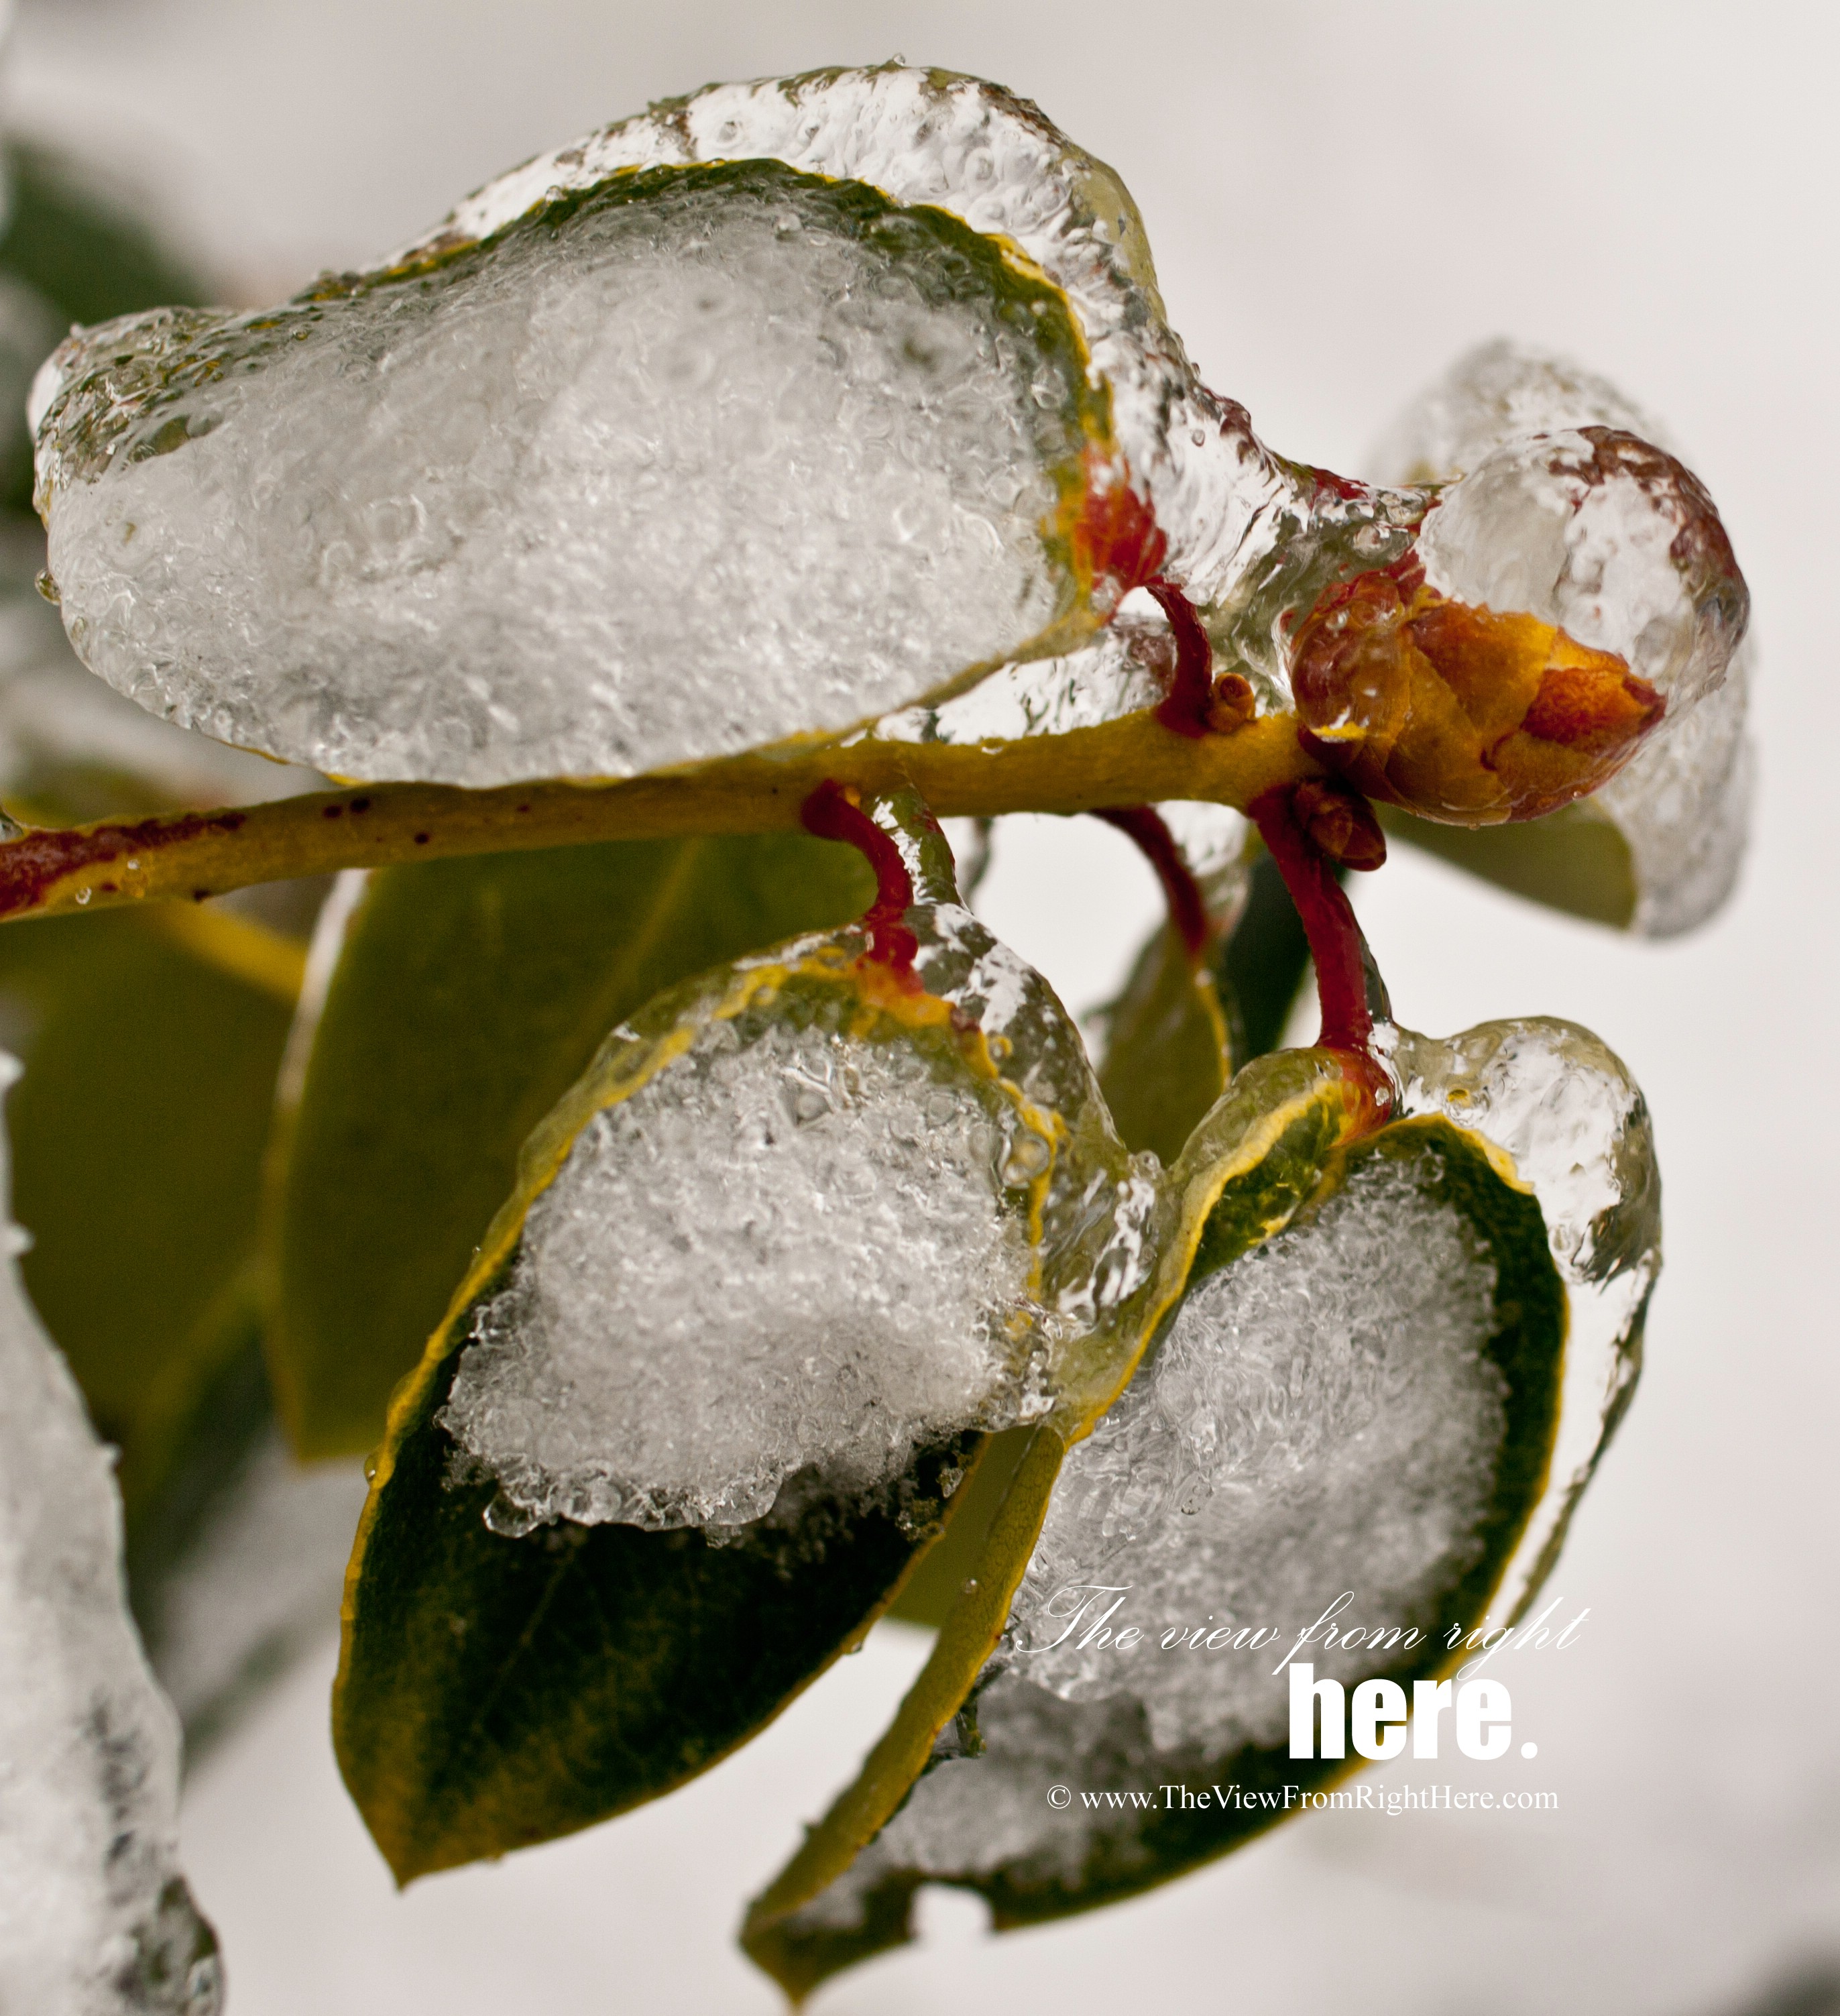 Iced – Frozen Rhododendron